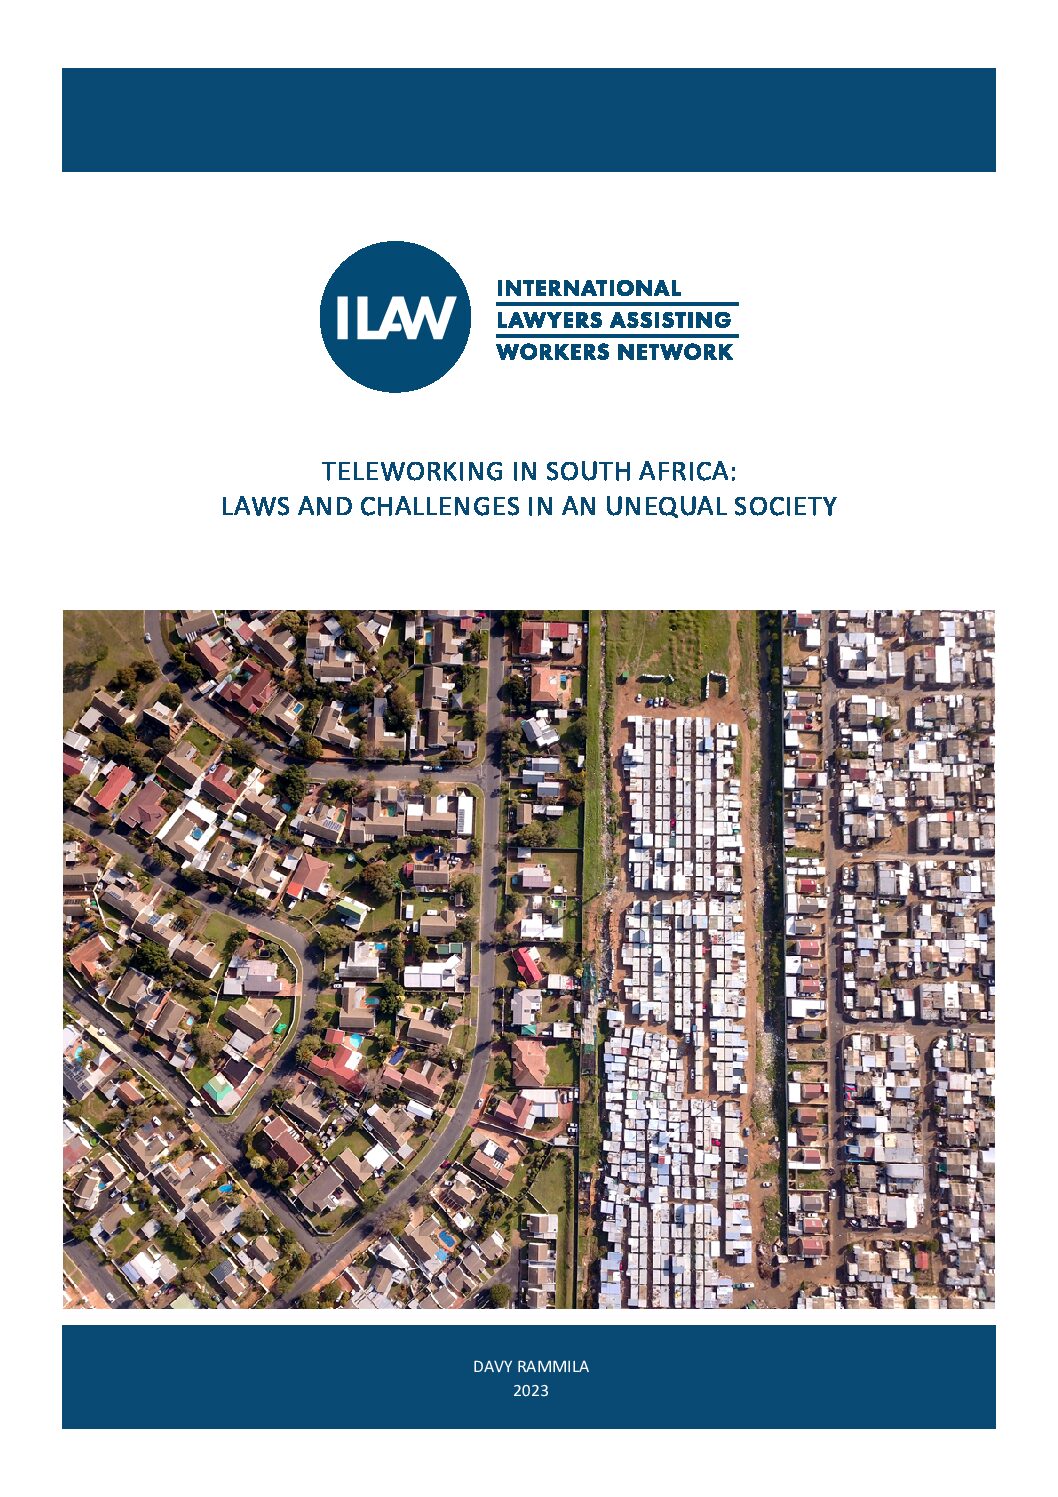 TELEWORKING IN SOUTH AFRICA: LAWS AND CHALLENGES IN AN UNEQUAL SOCIETY